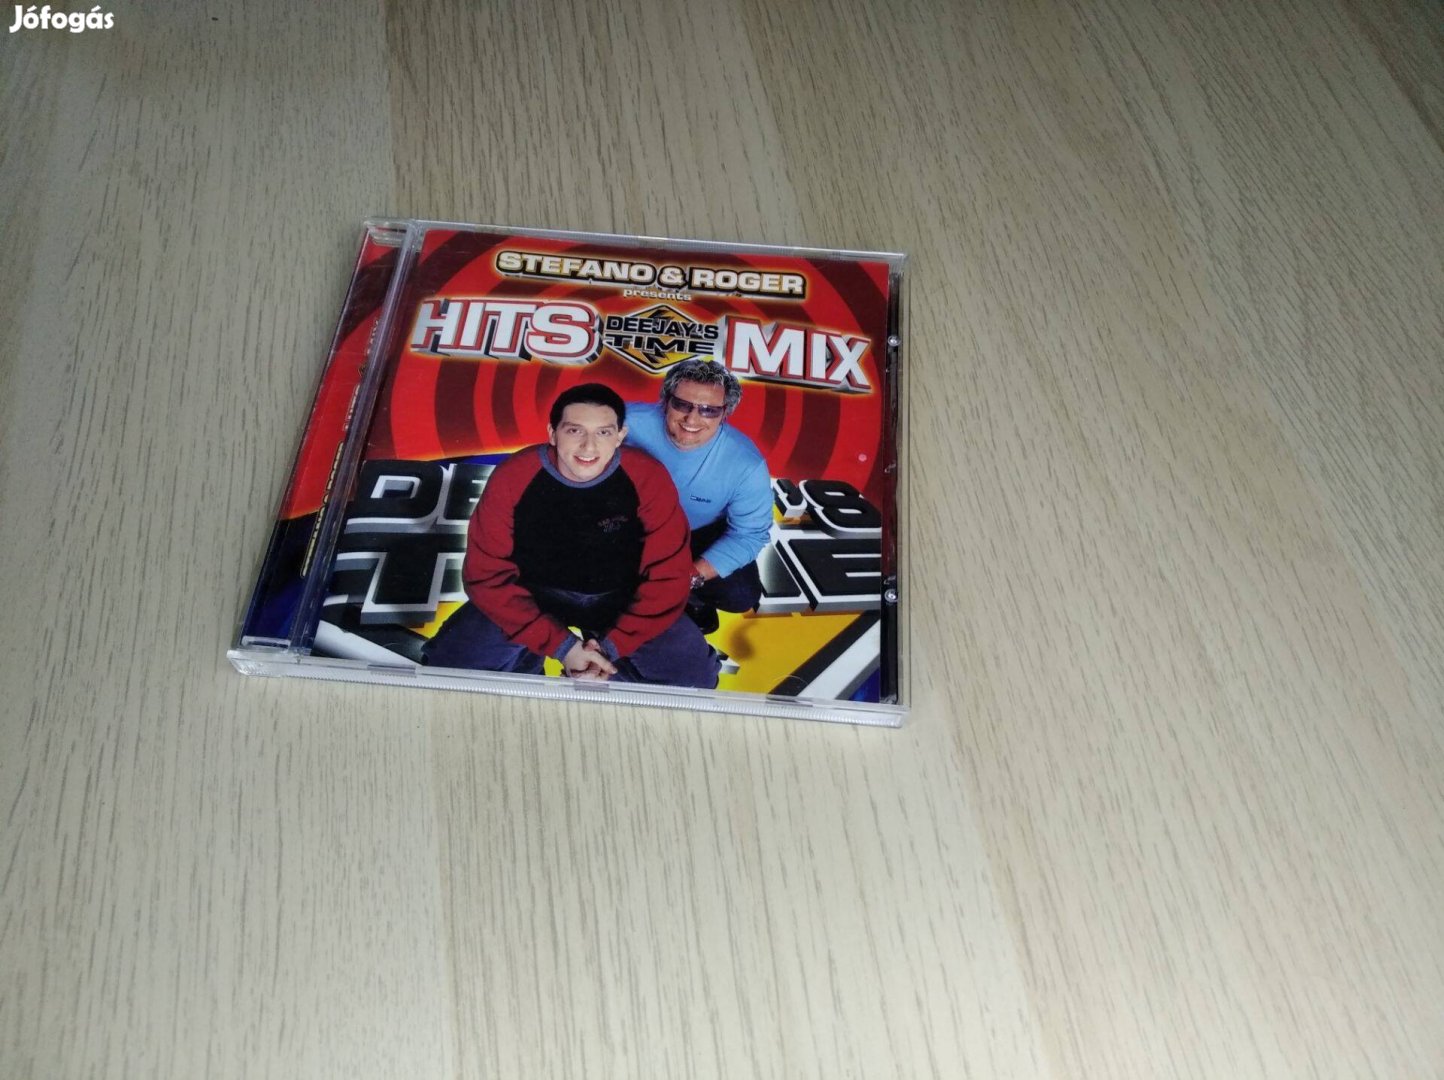 Stefano & Roger - Deejay's Time Hits Mix / CD